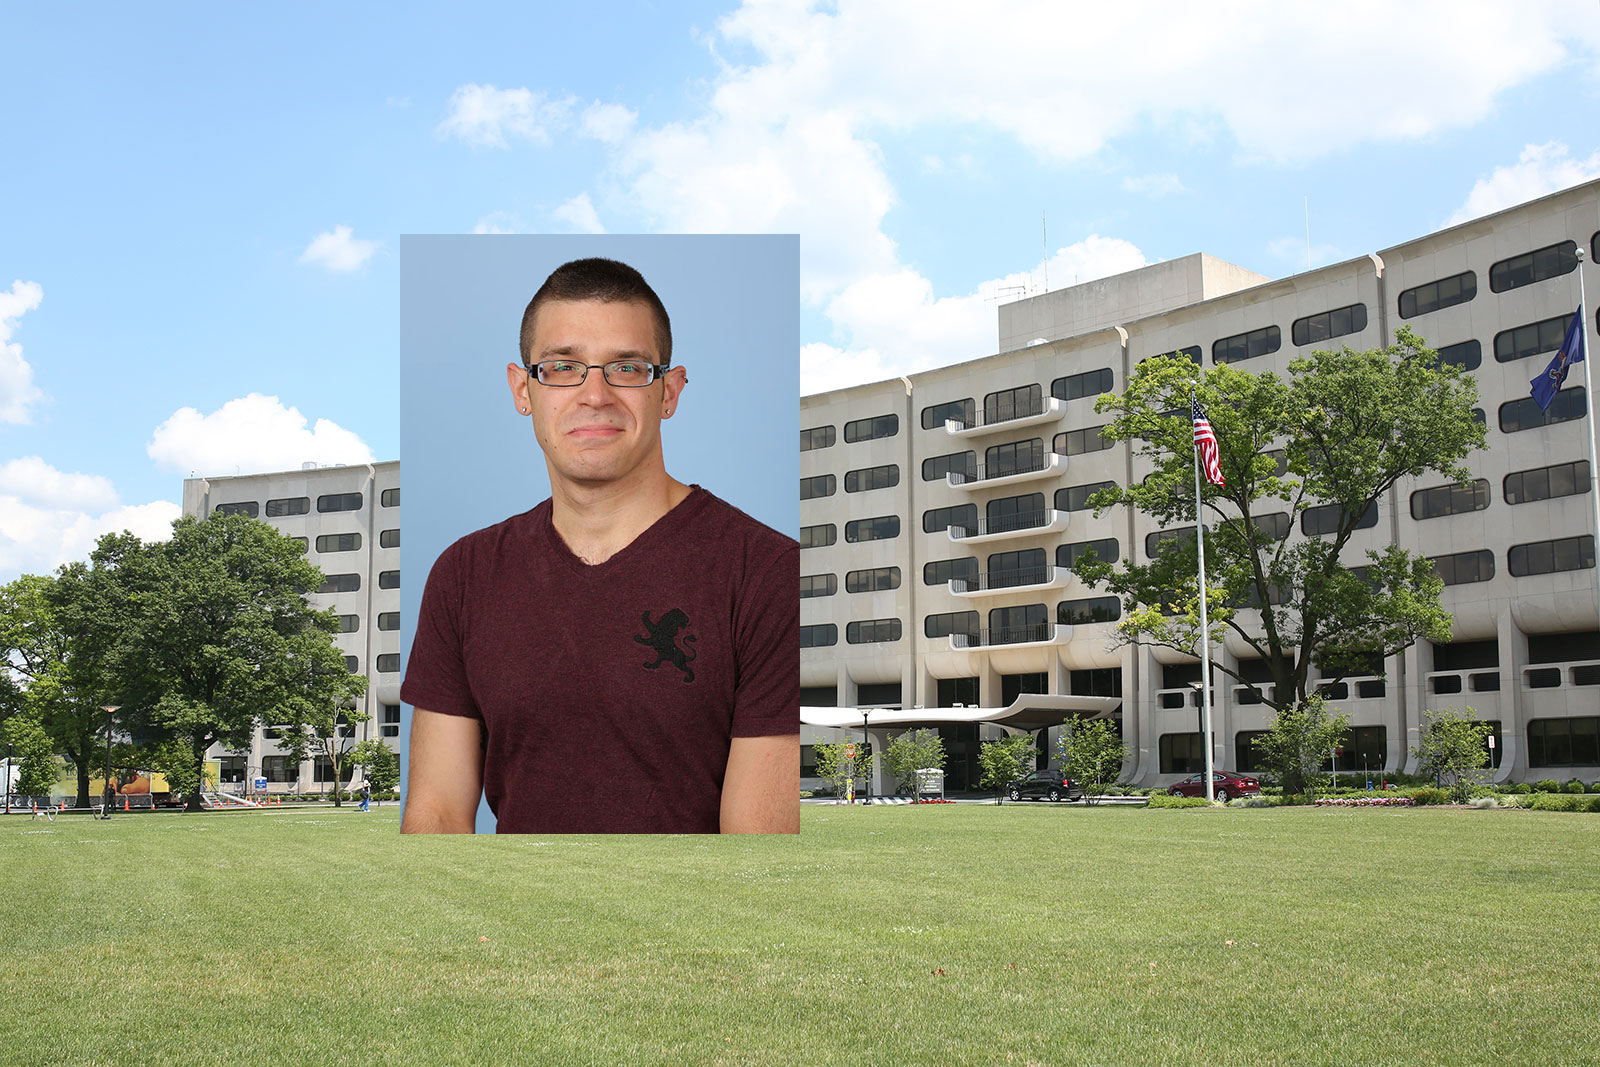 Gary J. Farkas, a student in the Anatomy PhD program at Penn State College of Medicine, was honored by the Department of Physical Medicine and Rehabilitation for excellence in graduate student research. A head-and-shoulders photo of Farkas is seen superimposed on the left side of a photo of the College's Crescent building in Hershey, PA.